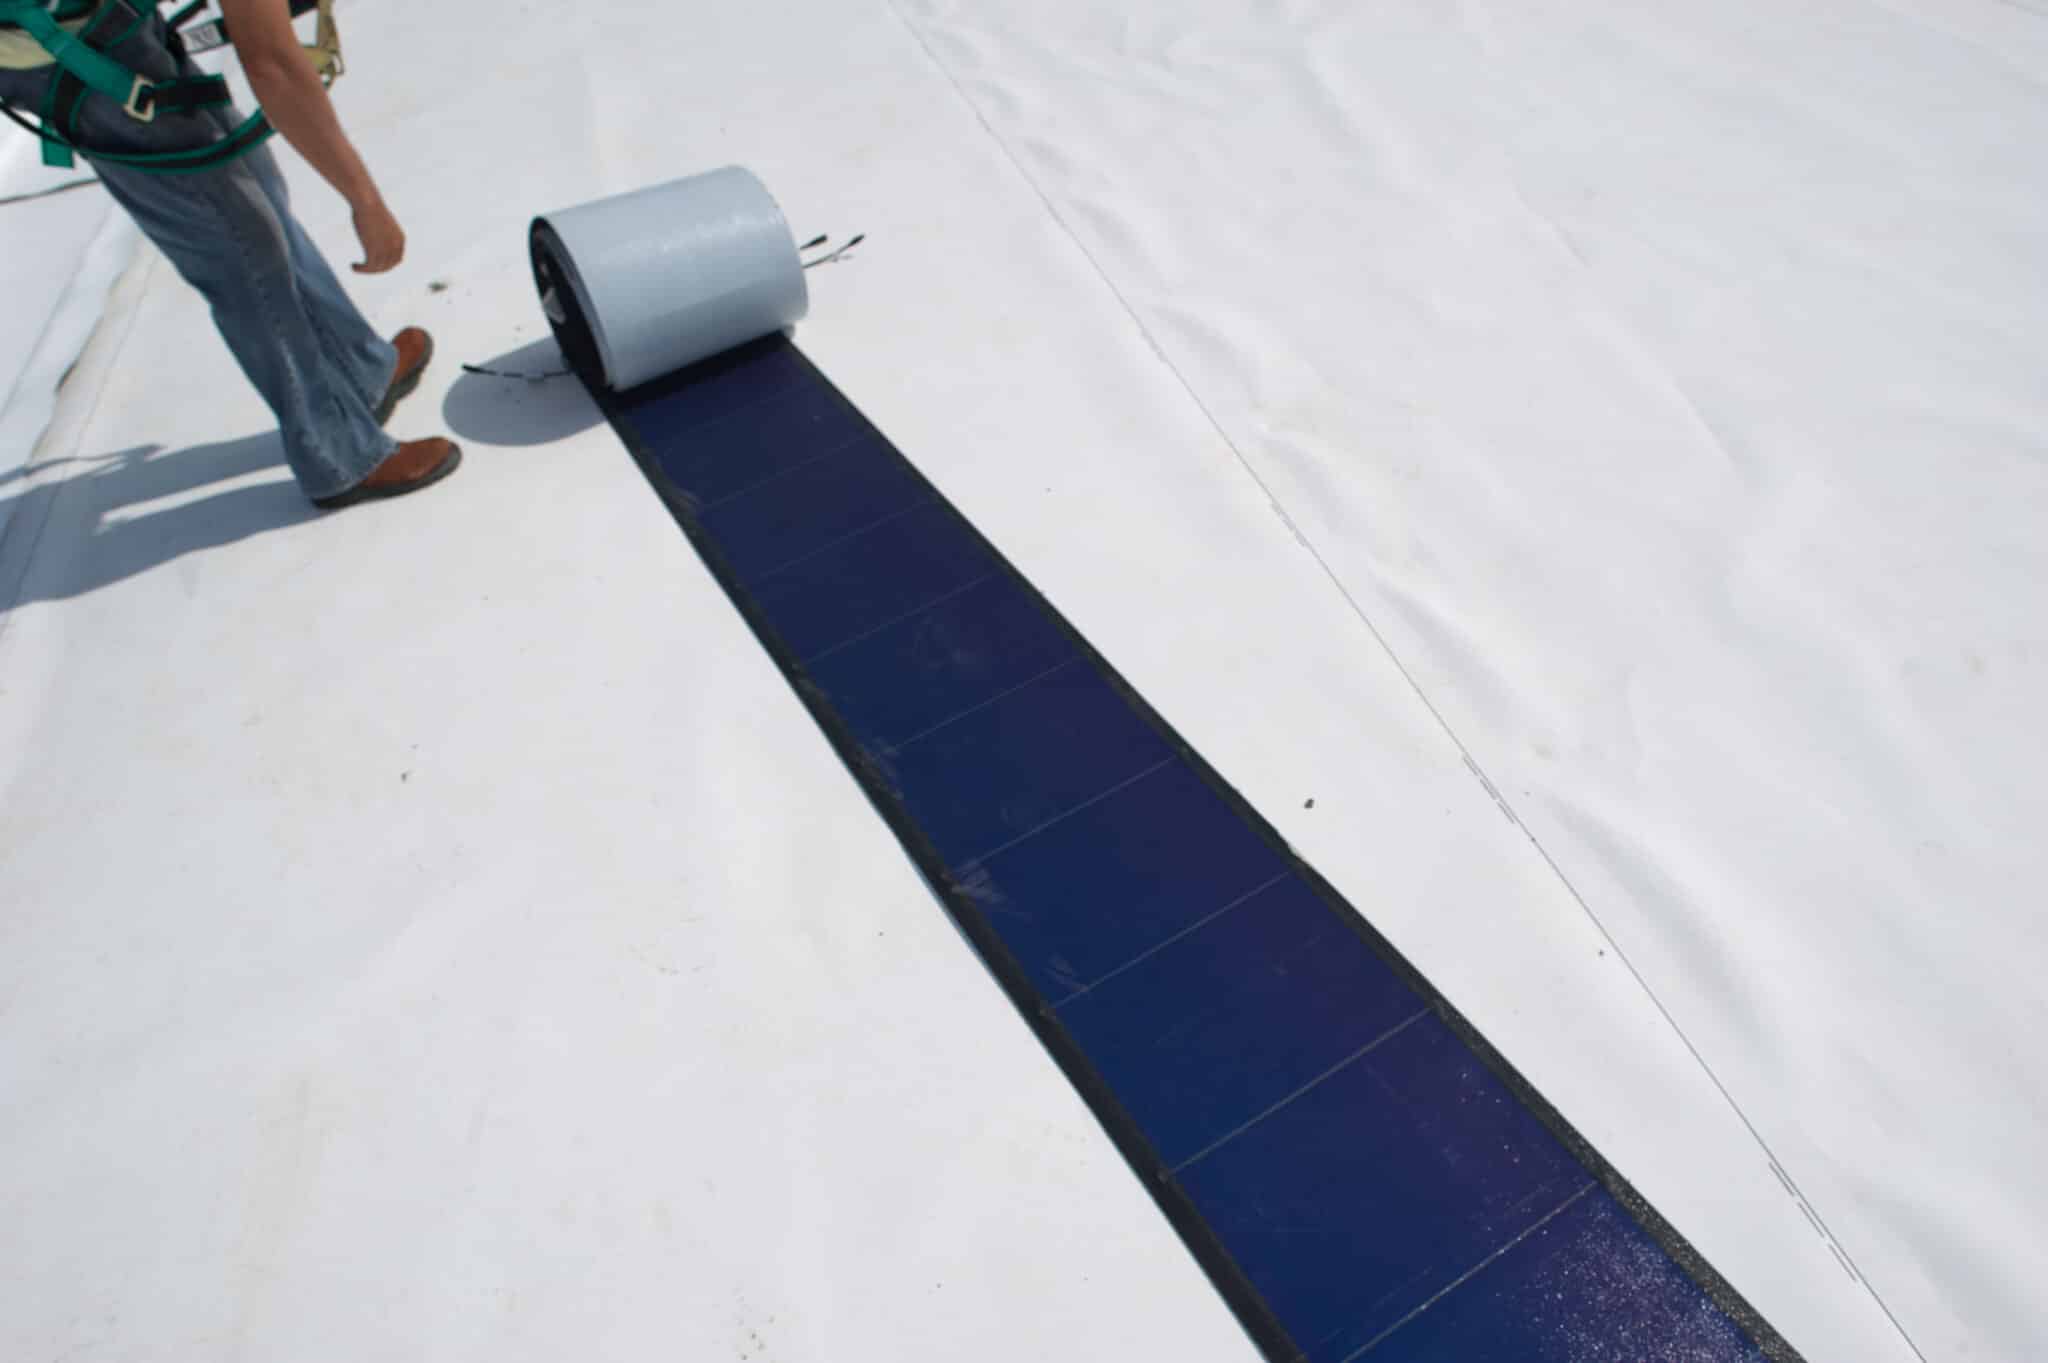 A worker deploys a flexible solar panel on the roof of the Pituacu stadium, in Salvador, Brazil on December 1, 2011. The Pituacu stadium will be the first sporting venue equipped with a photovoltaic system in Latin America.